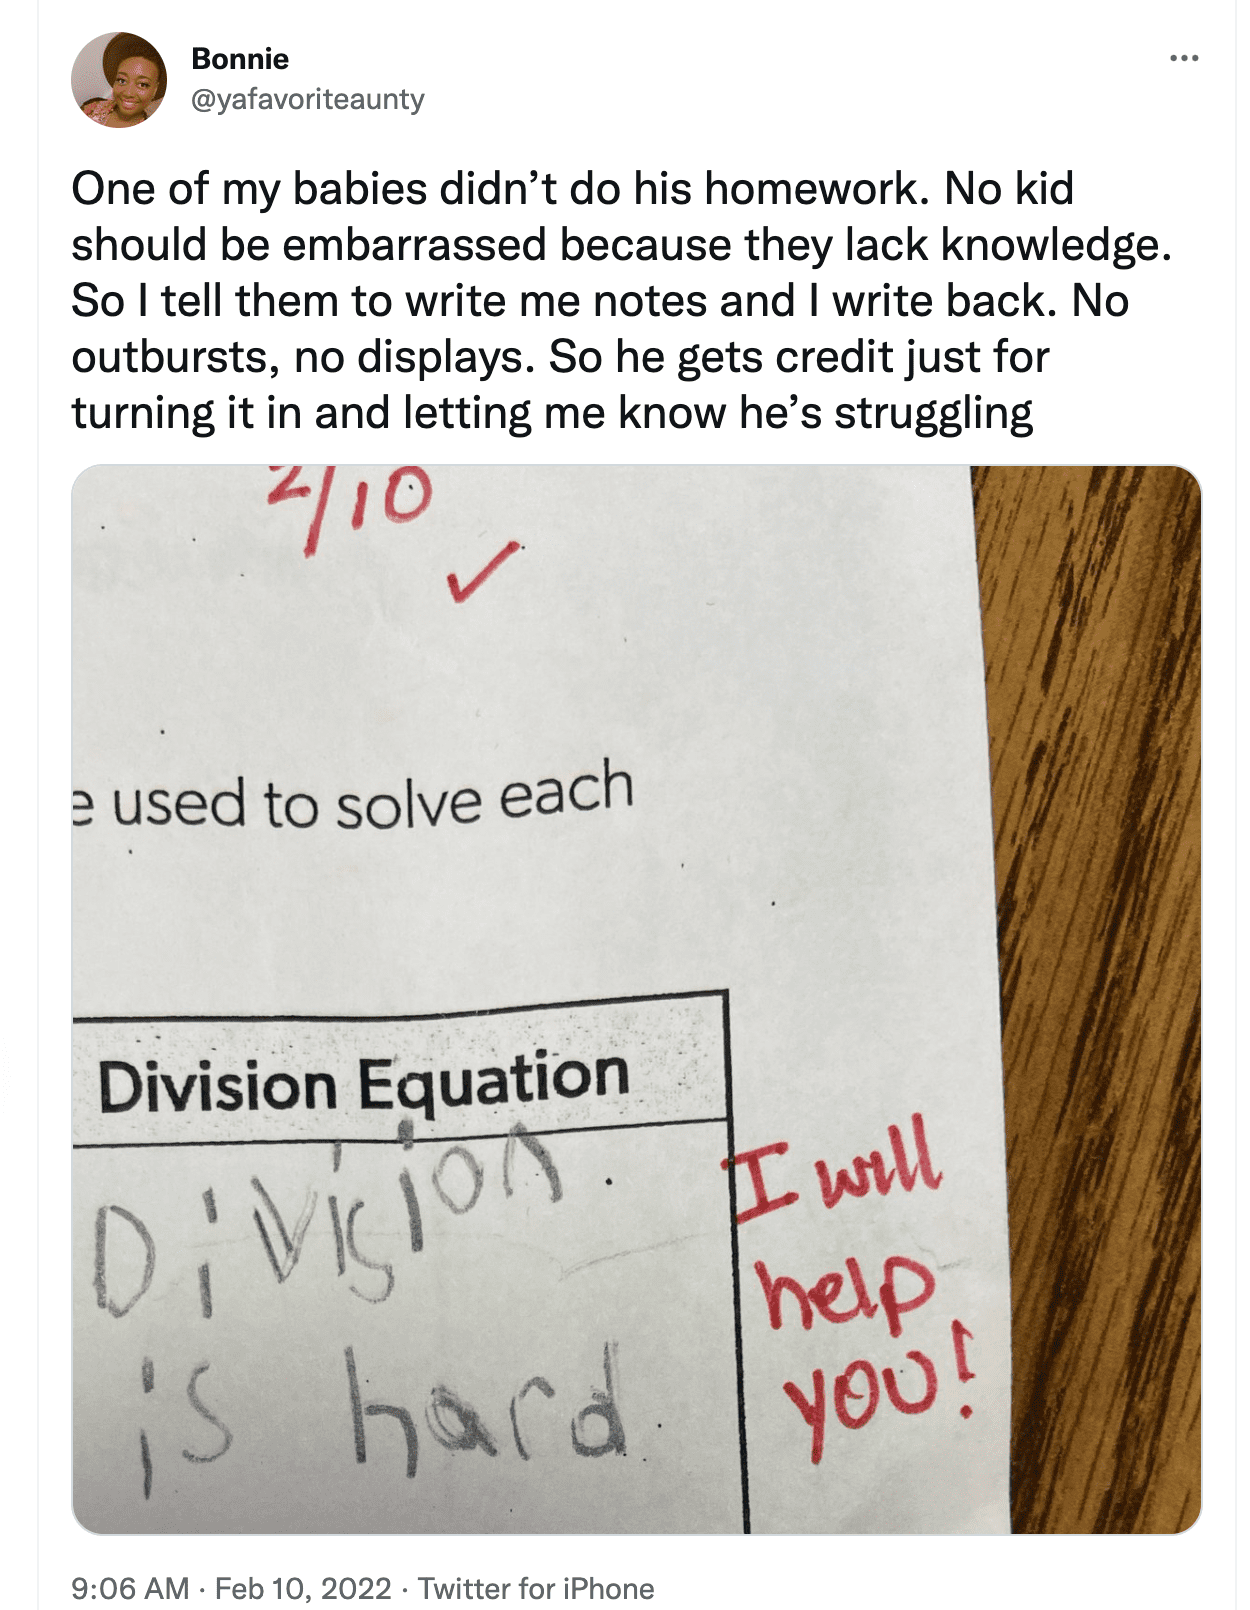 Why We All Need to Adopt This Twitter Teacher’s Homework Policy